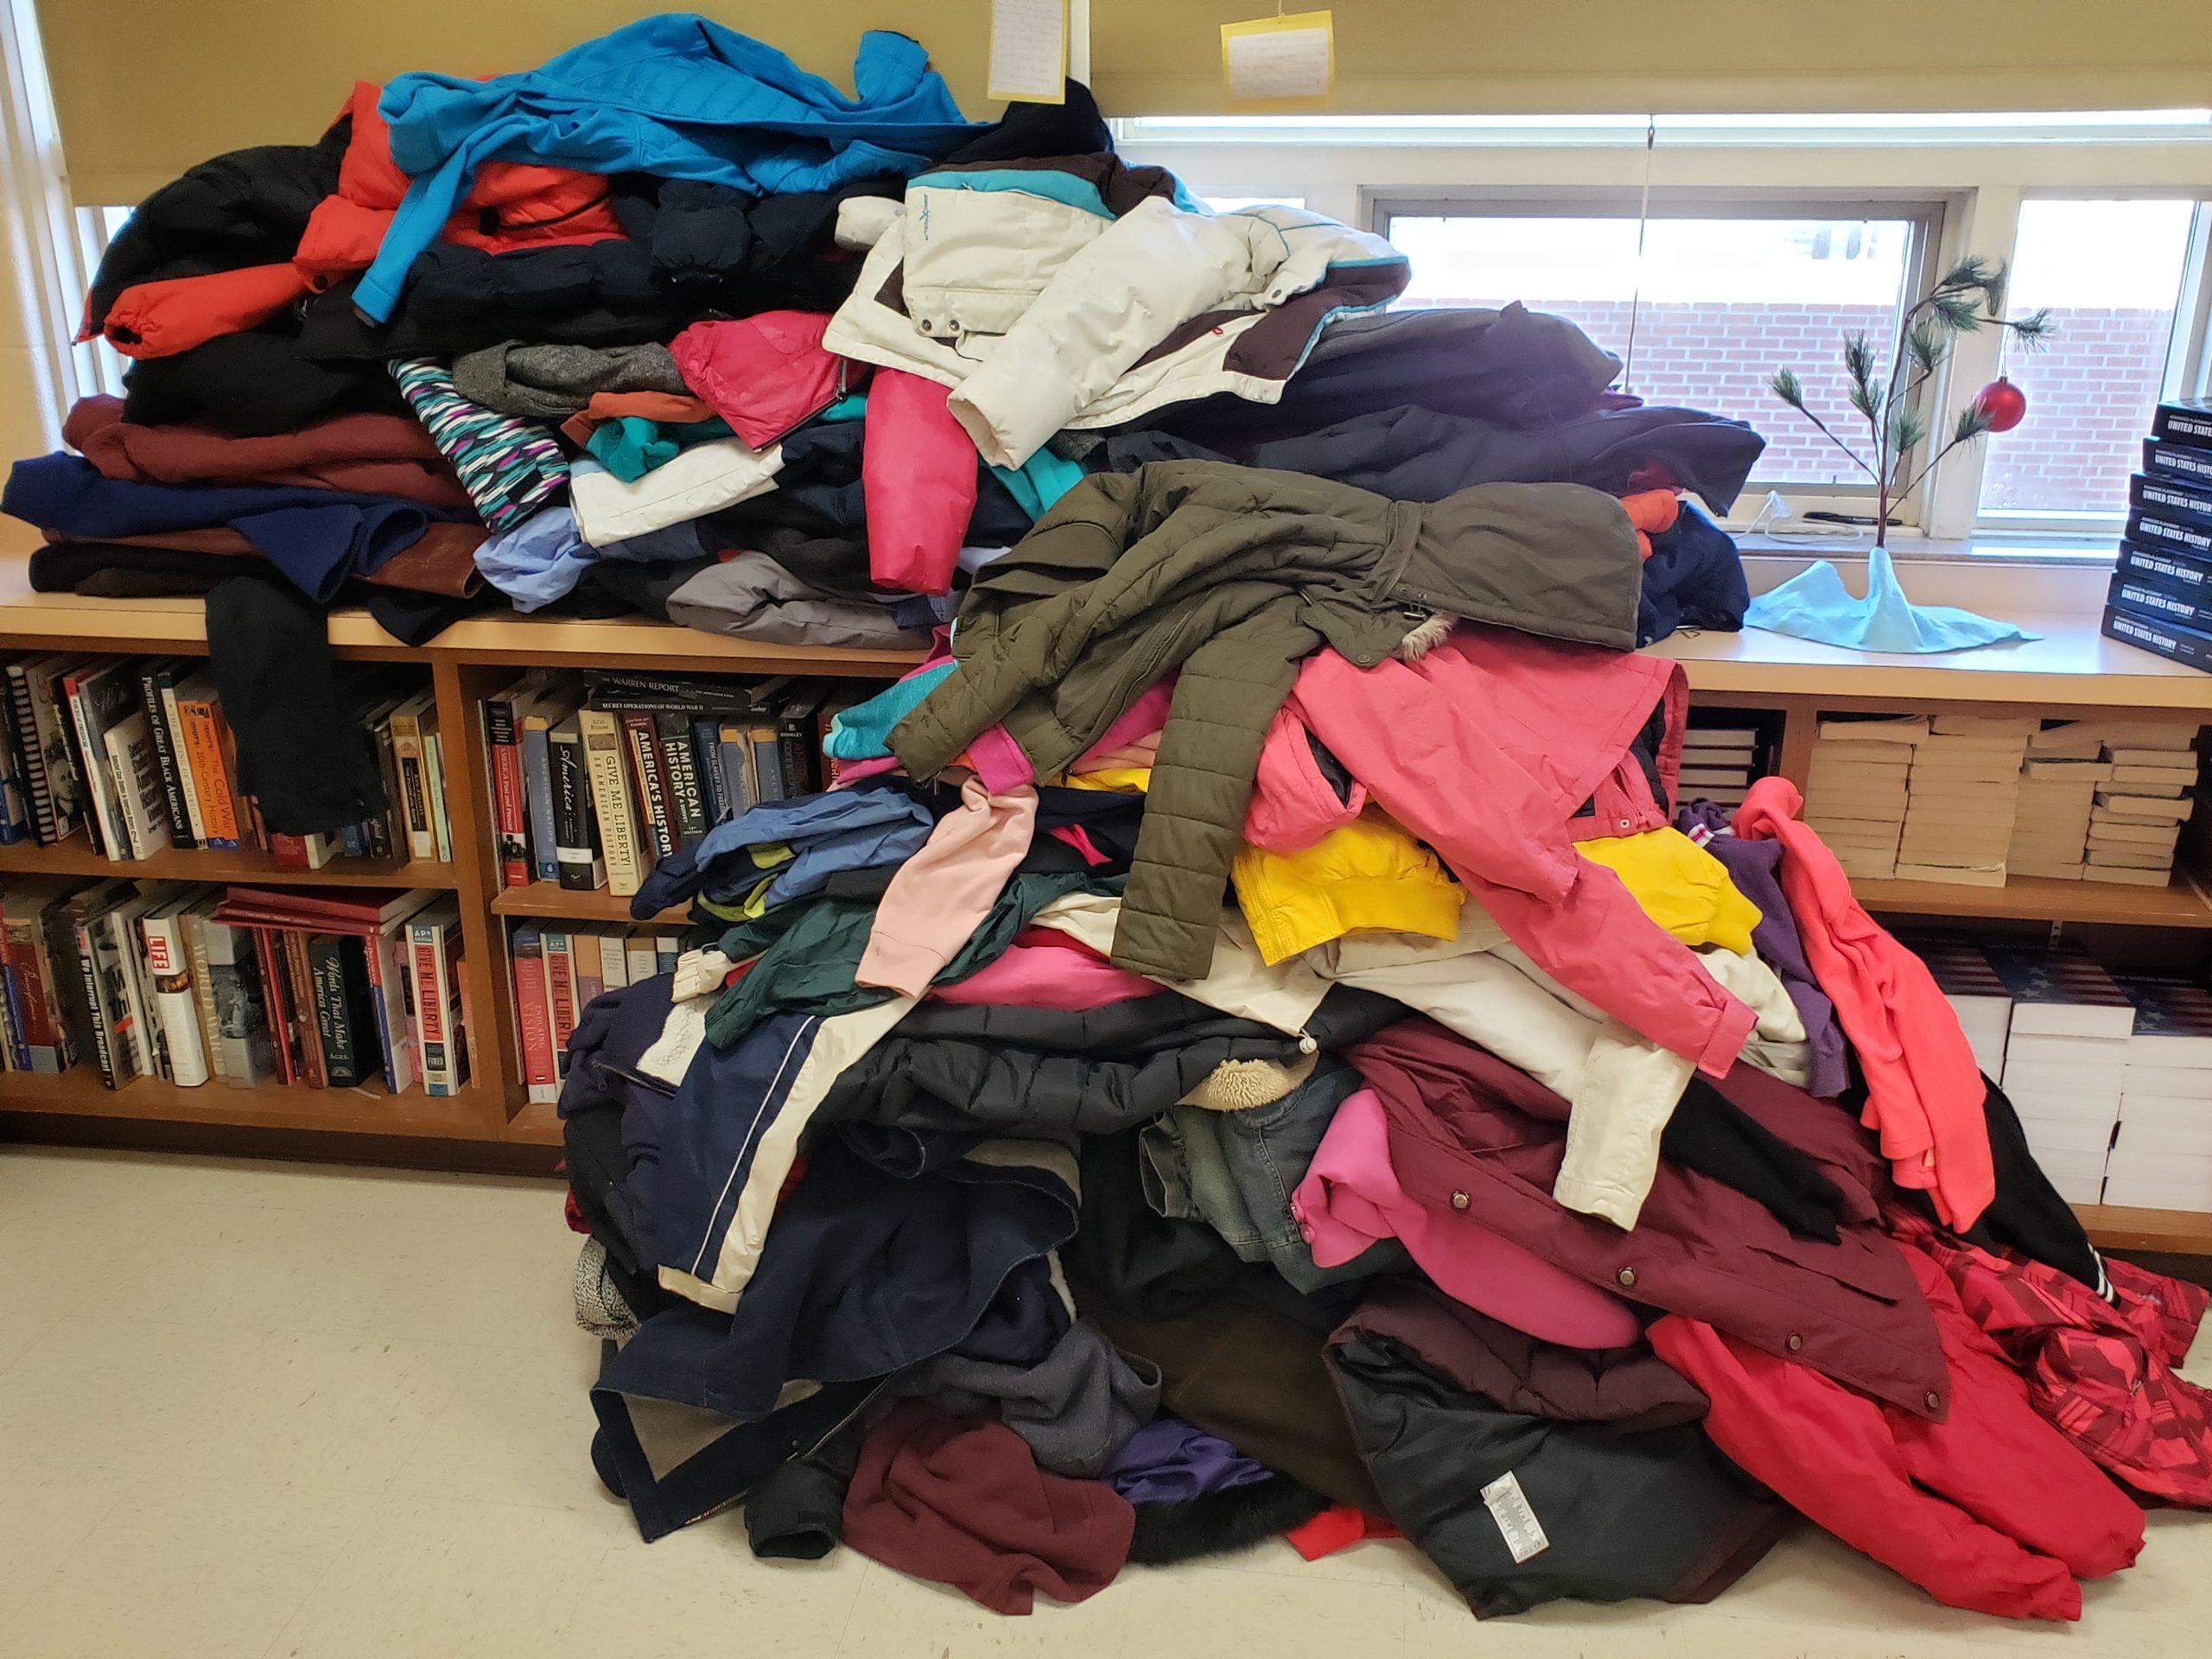 The National Honor Society’s coat drive collected 112 coats which were given to SASD students in need and the rest donated to Haven Ministries.